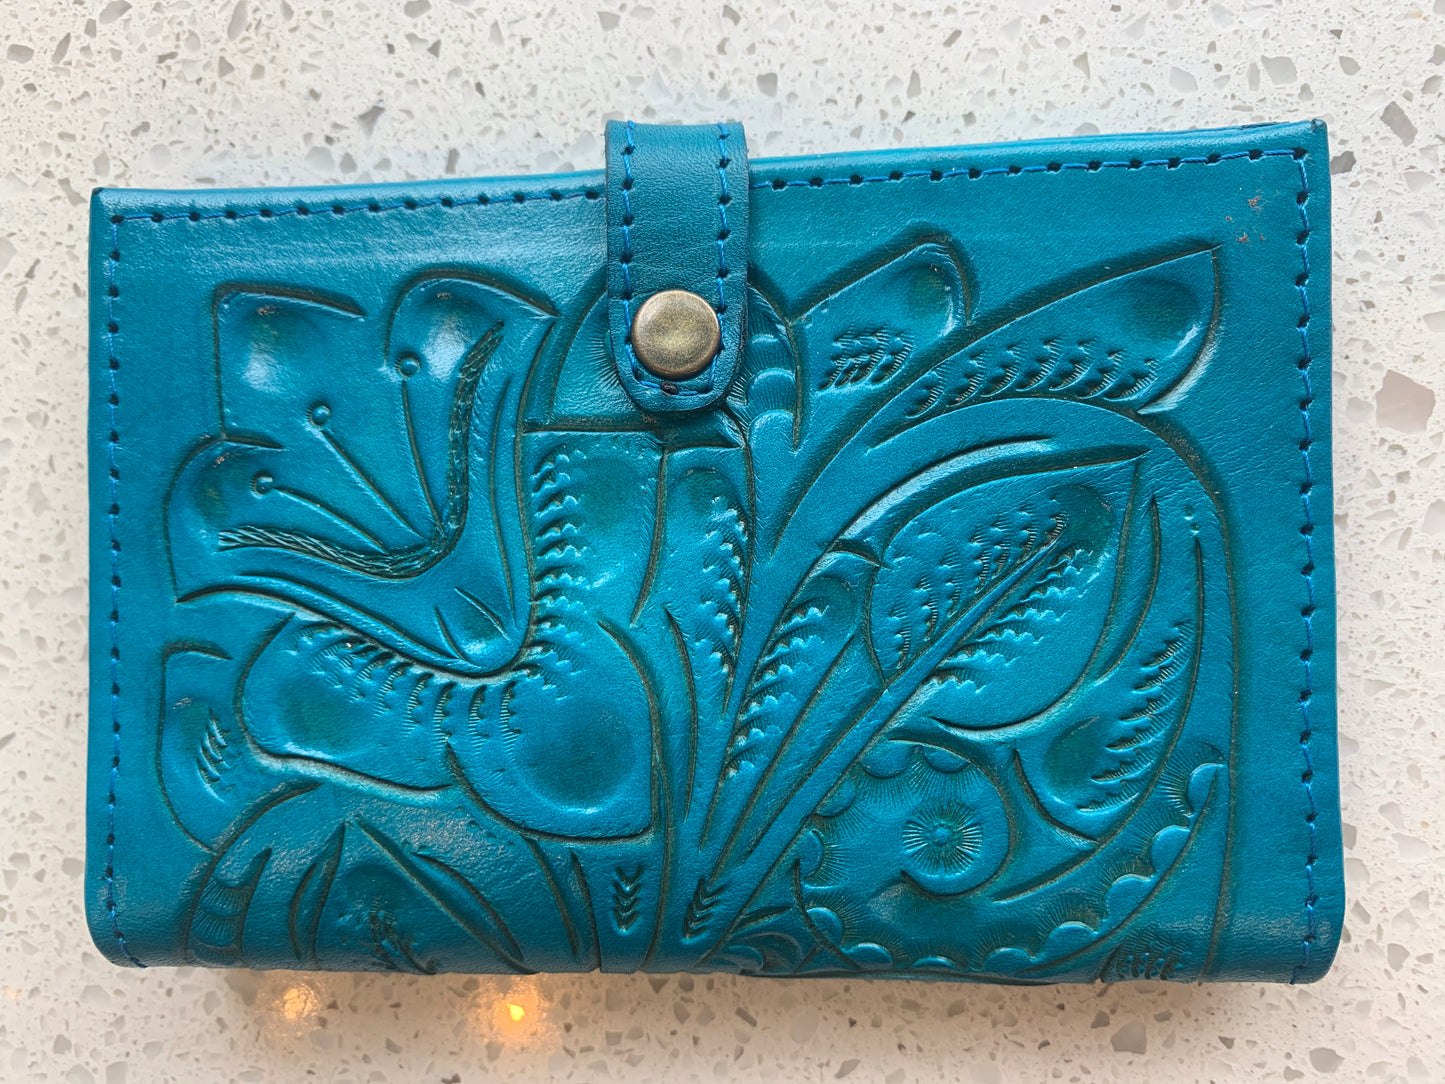 Hand-Tooled Leather Passport Cover/Wallet Wallets Hide and Chic Turquoise  